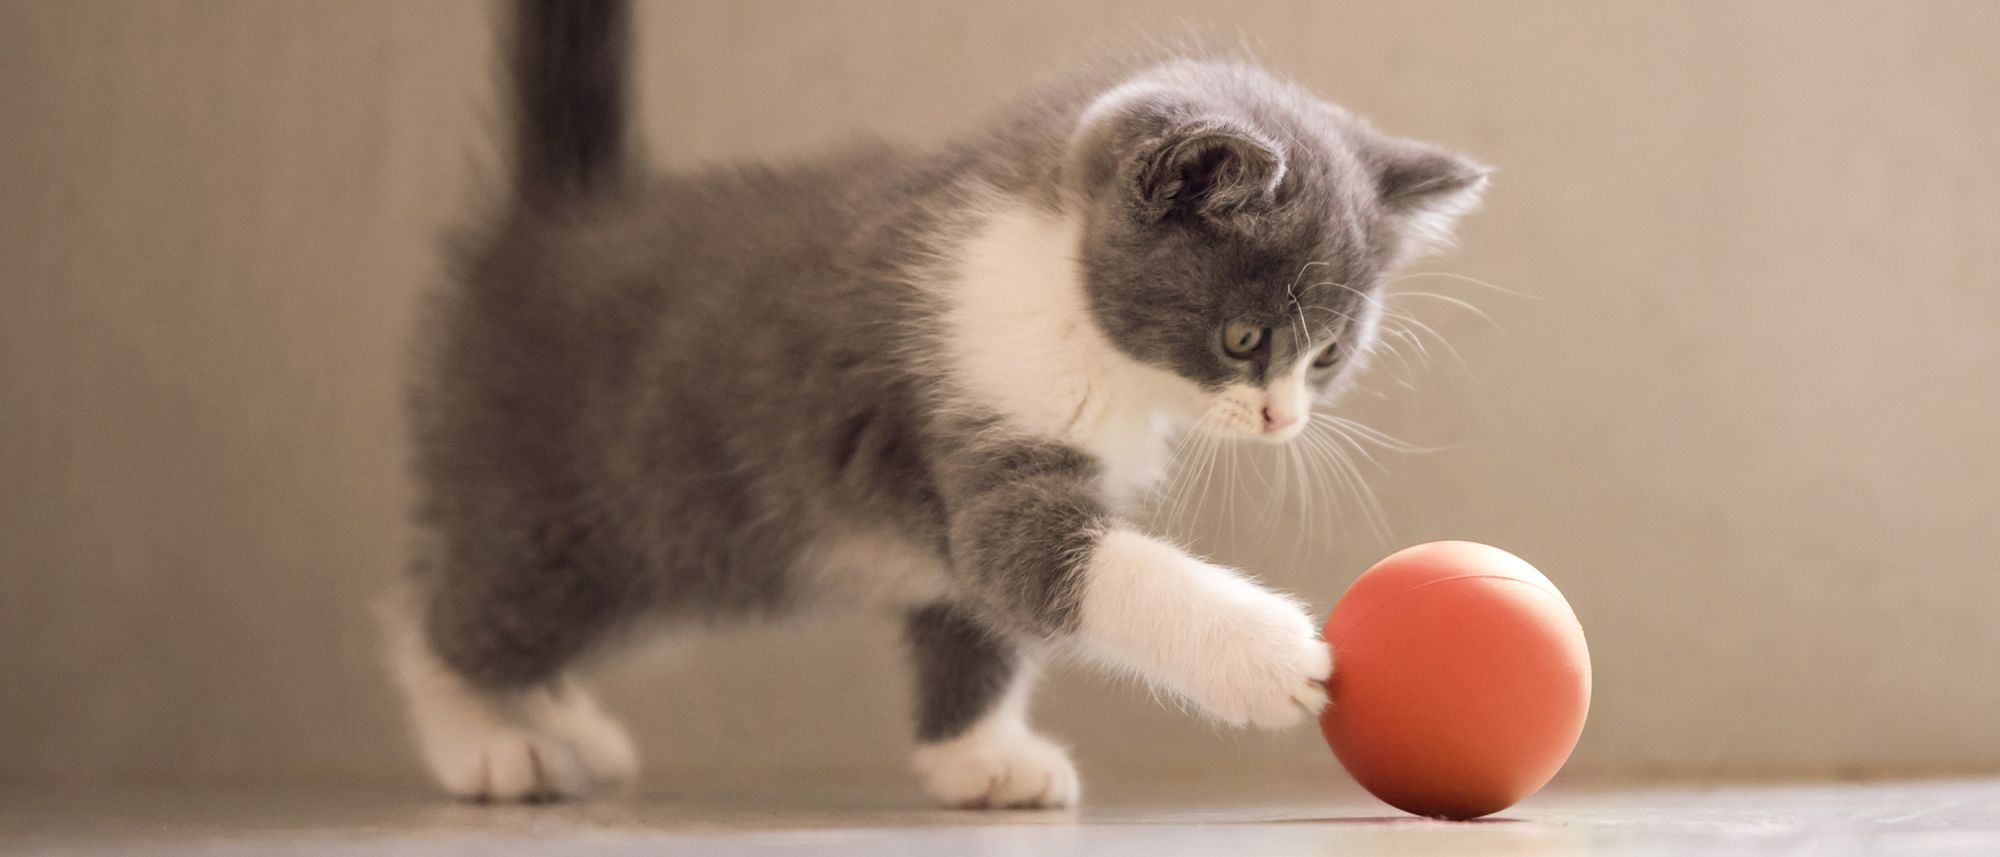 Kitten playing with a red ball